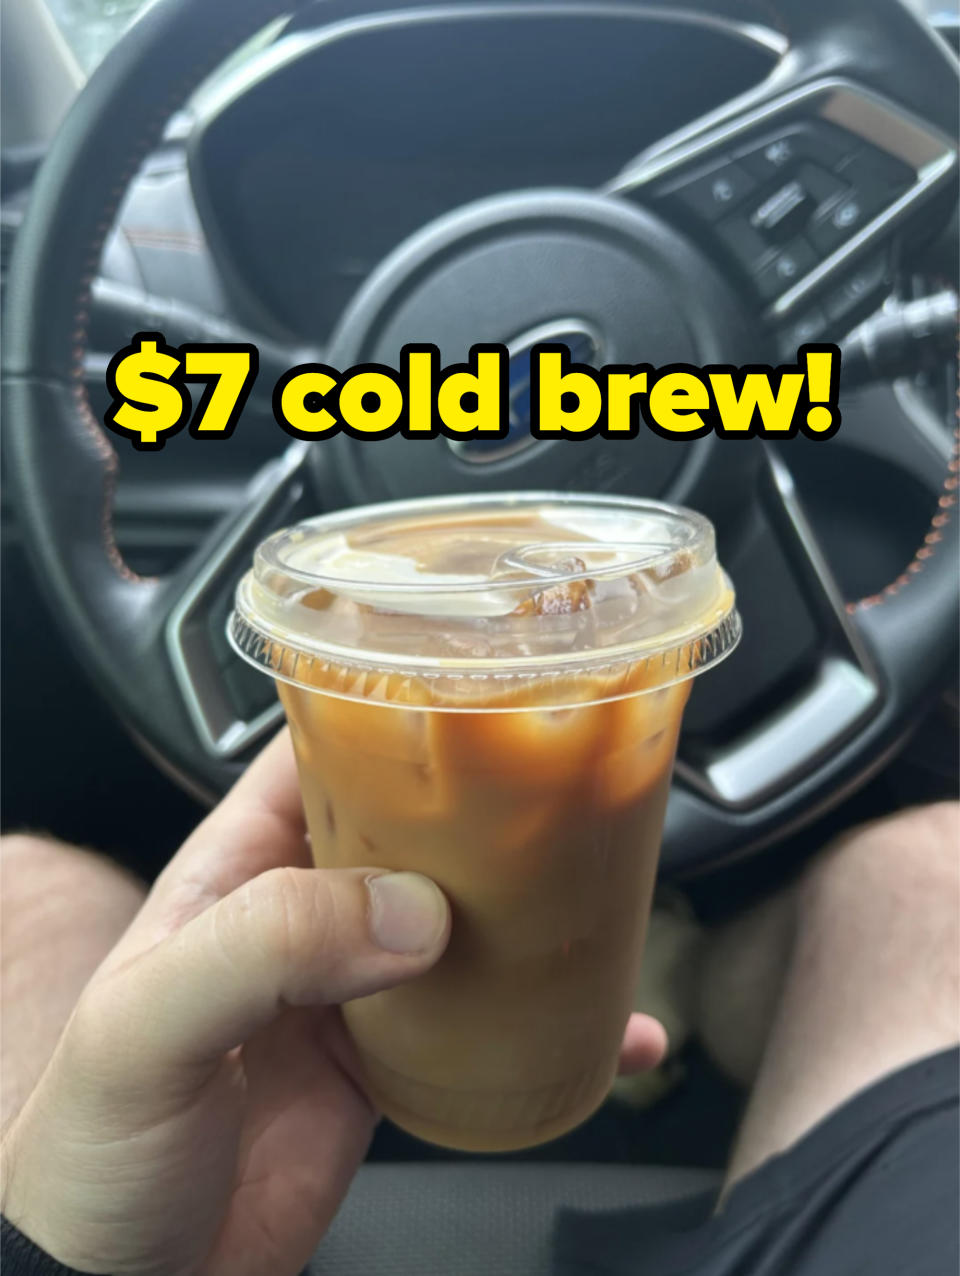 Person holding an iced coffee in a car with overlay text saying $7 cold brew